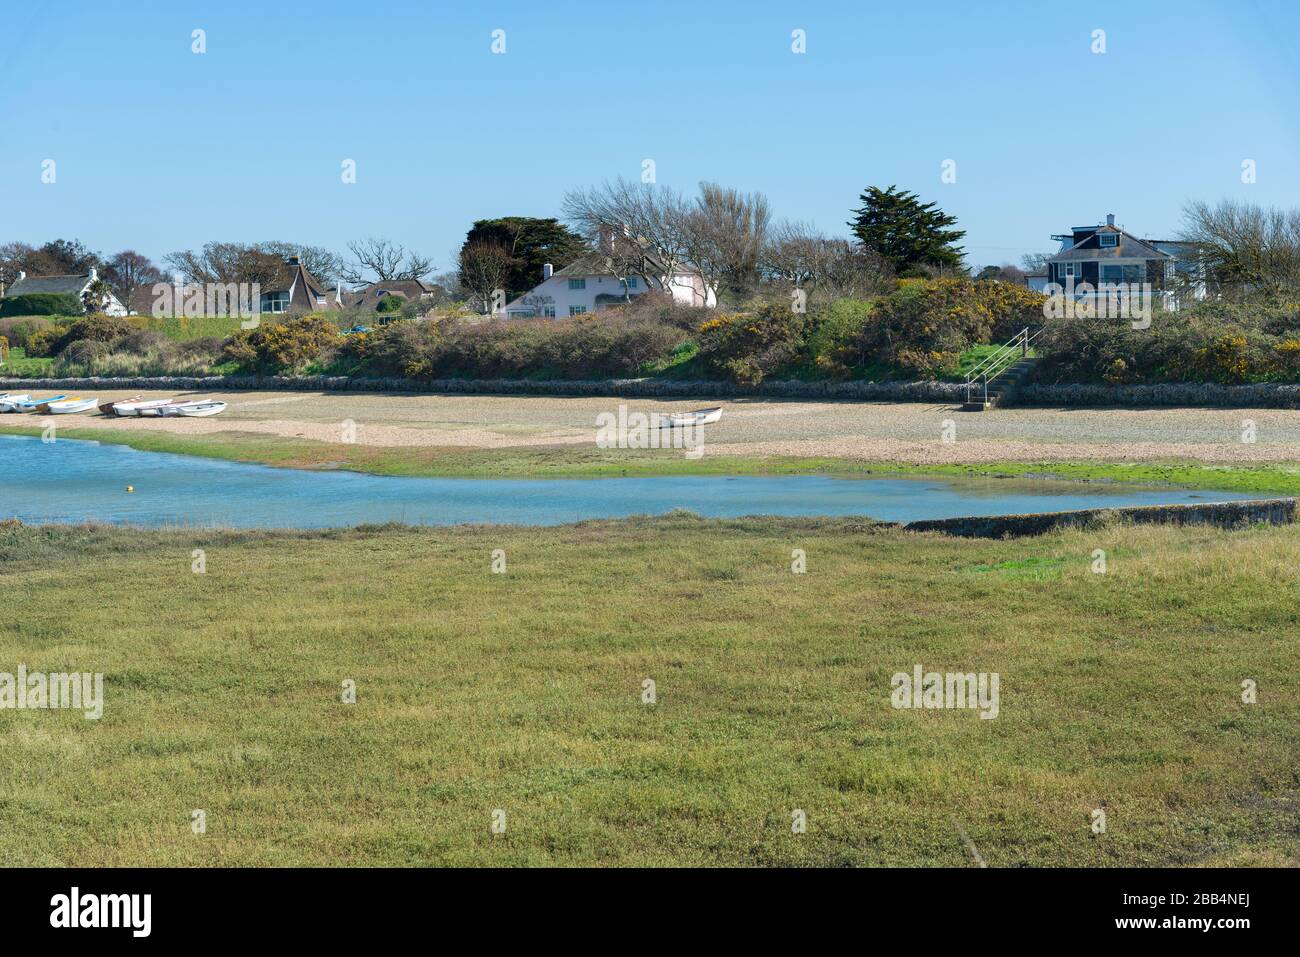 Snowhill Creek at half tide in front of desirable waterfront houses on Roman Landing, West Wittering, Chichester, West Sussex, England, UK Stock Photo